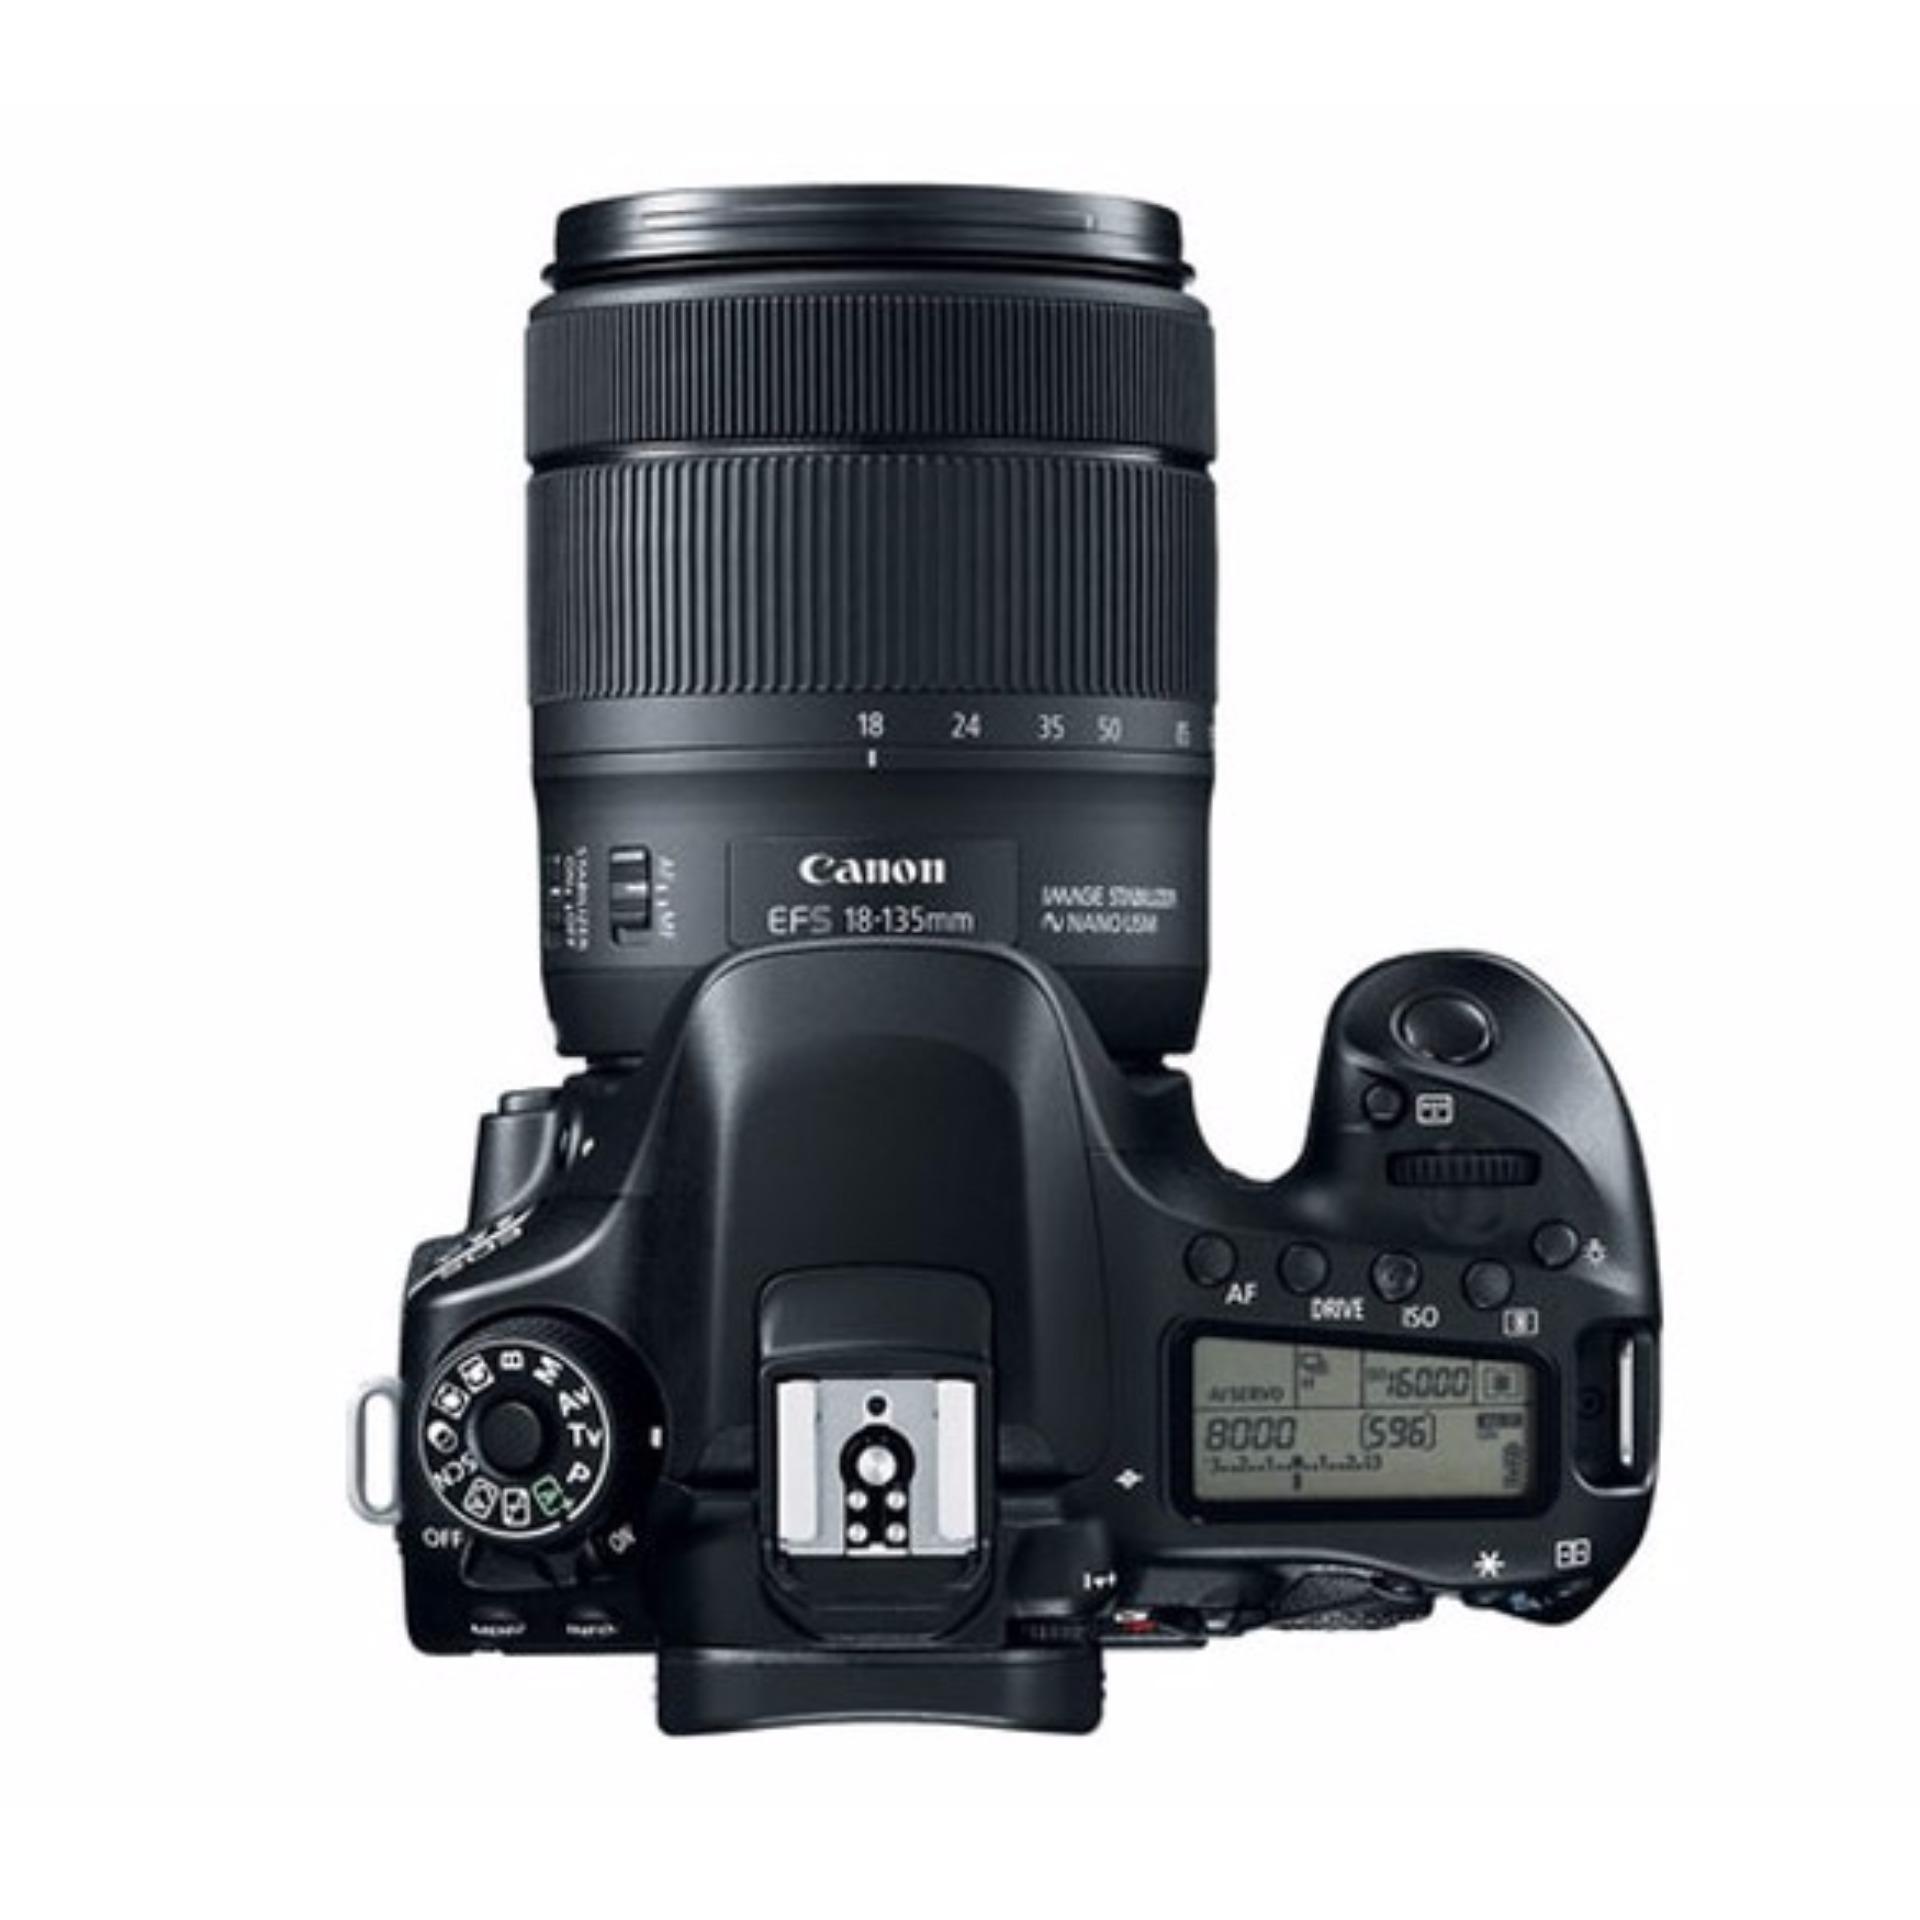 Canon EOS 80D DSLR Camera with 18-135mm IS USM Lens